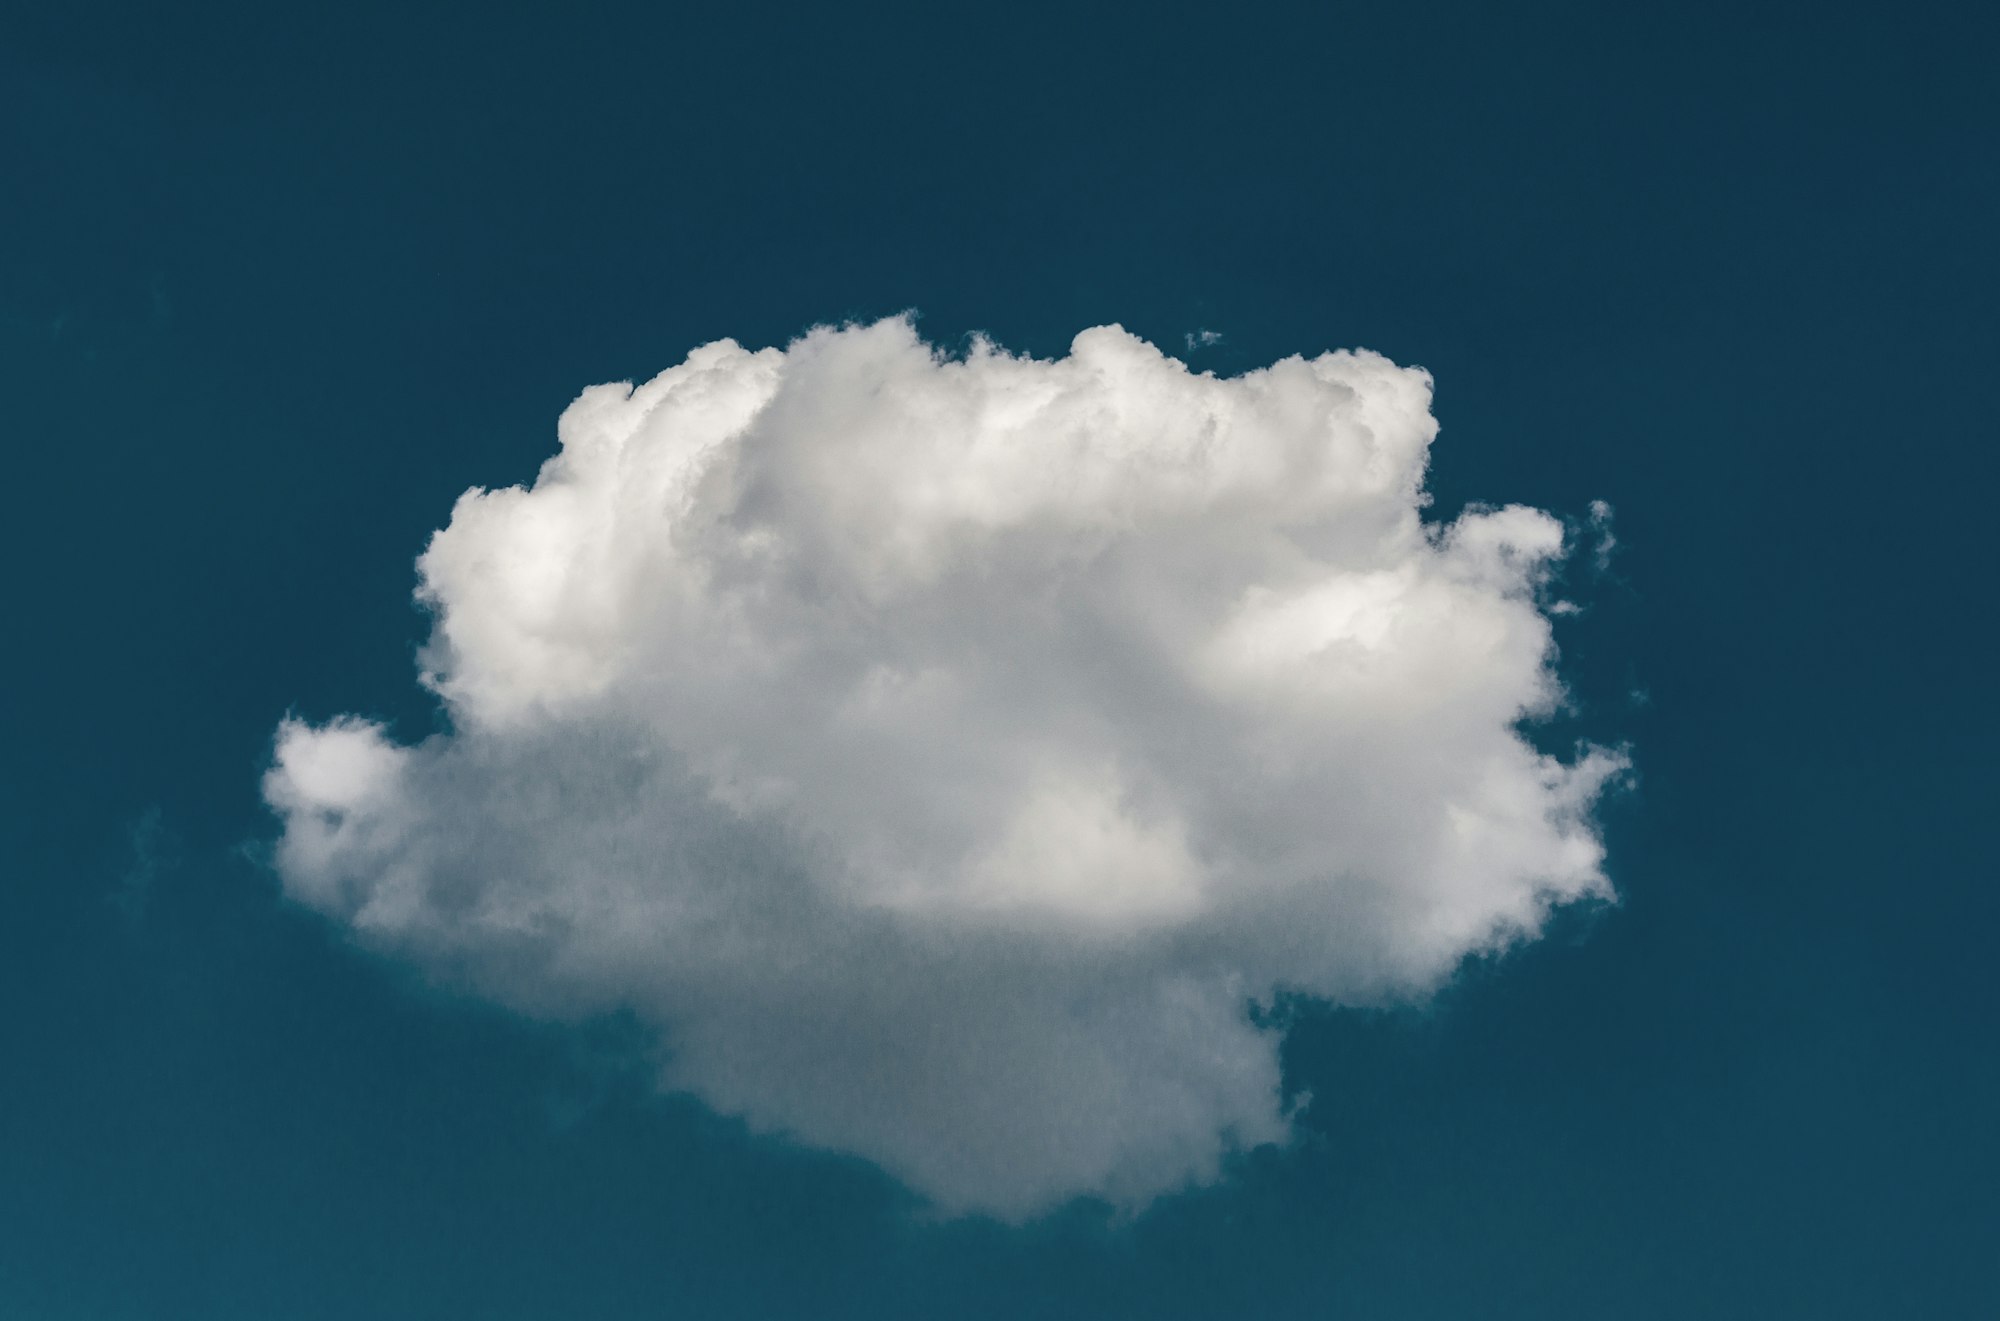 Hybrid Cloud Solutions: Bridging On-Premises and Cloud Environments